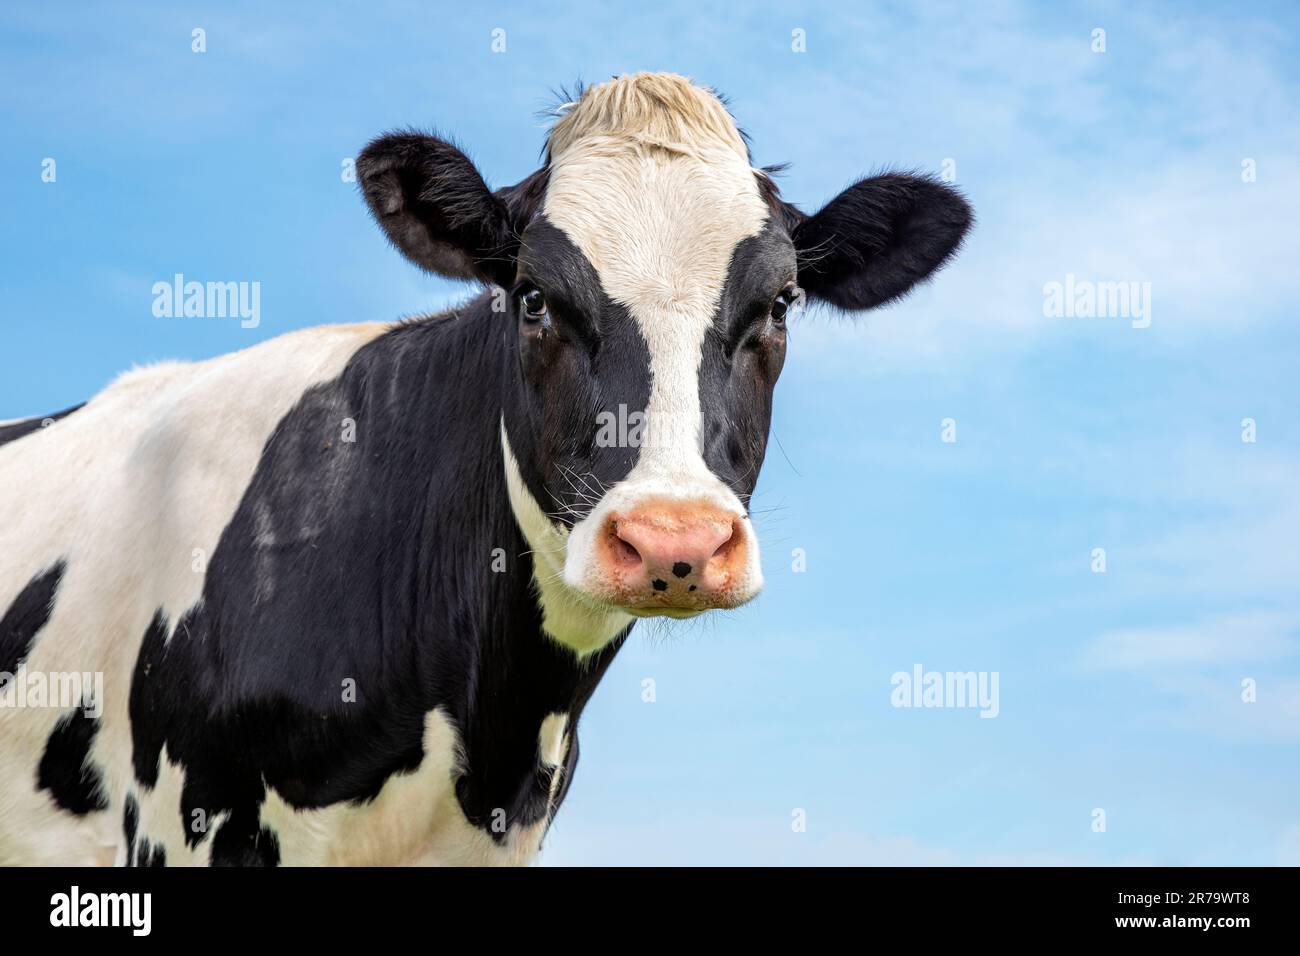 Sweet cow, black and white gentle looking, pink nose, in front of  a blue sky Stock Photo